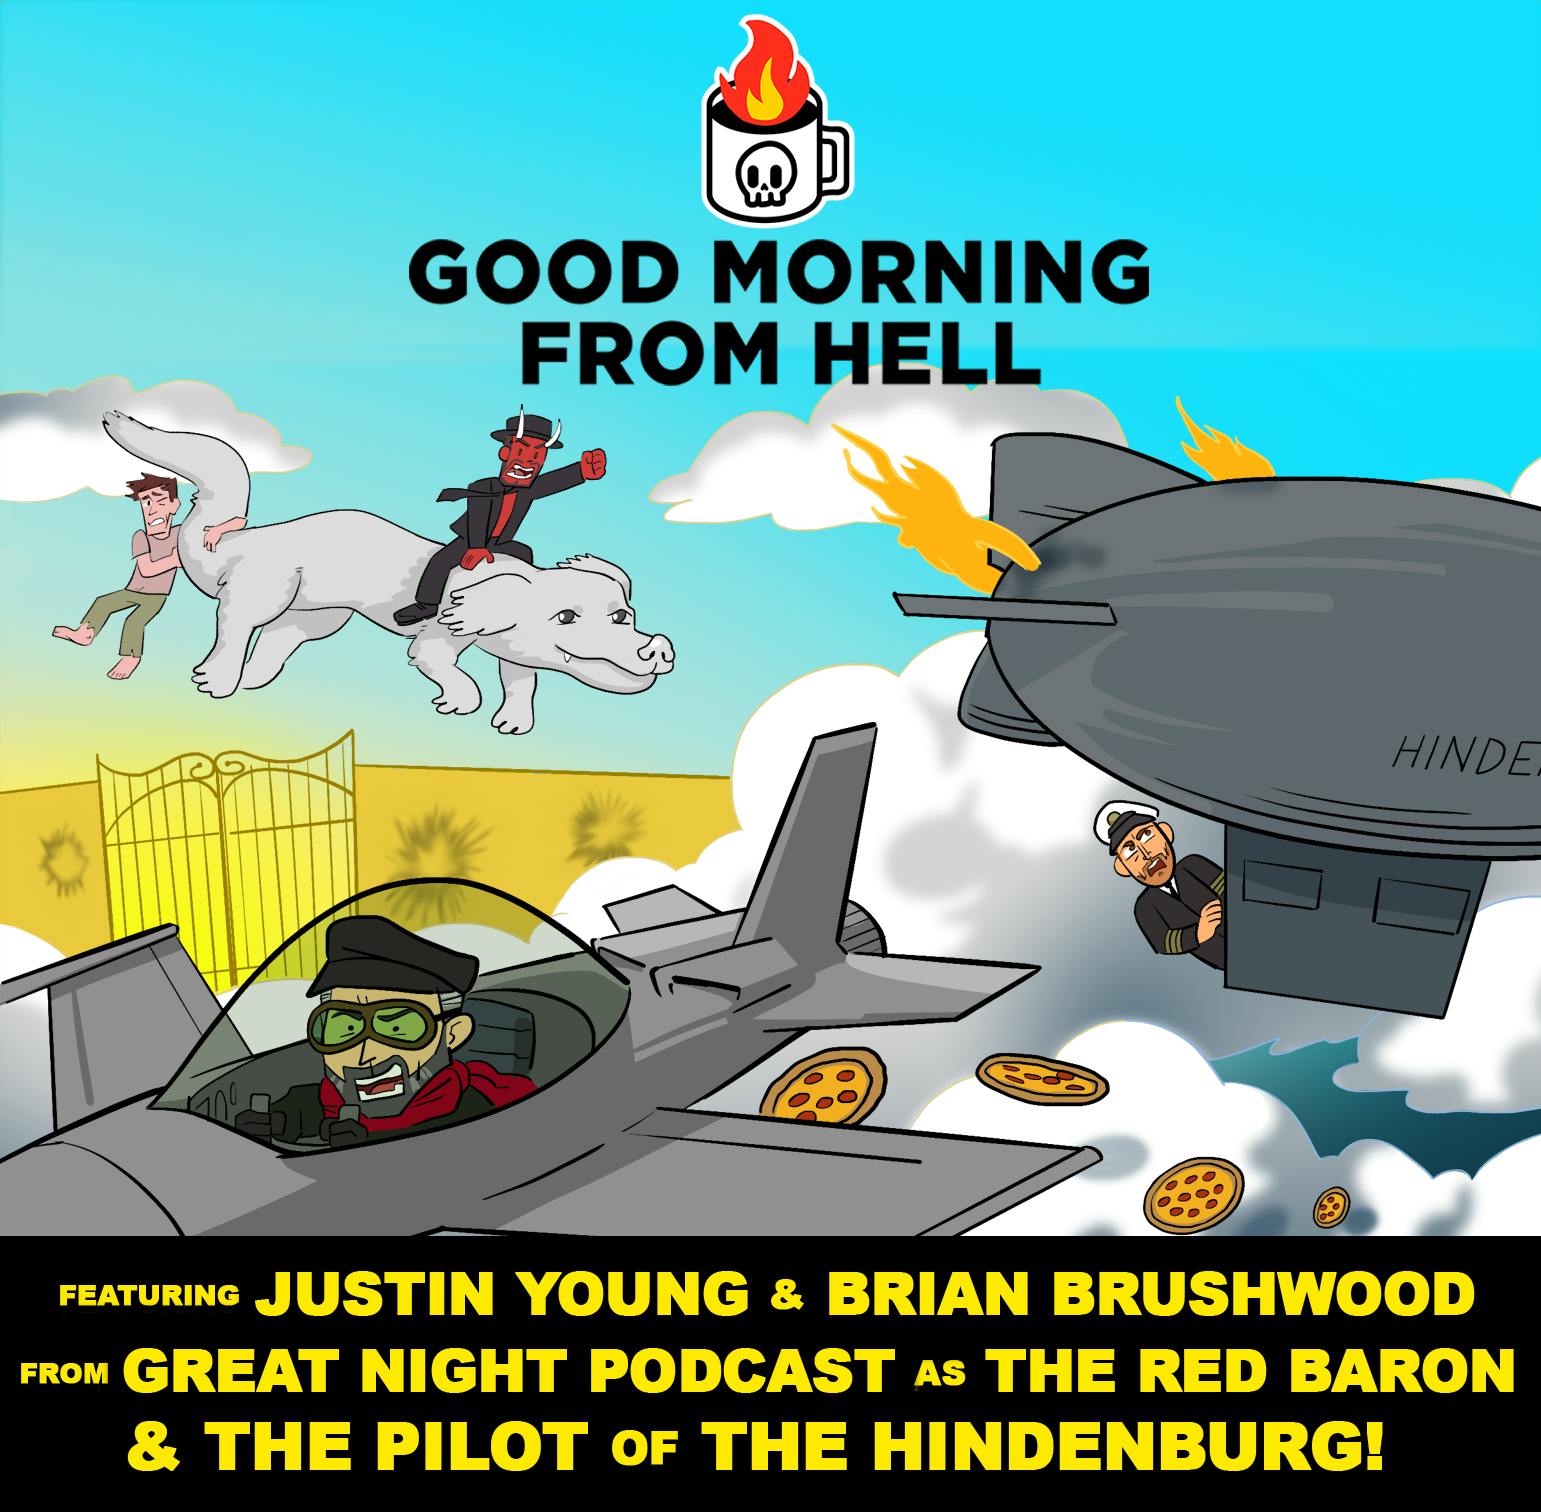 The Air Raid on Heaven w/ The Red Baron & the Hindenburg (Featuring Great Night) #92